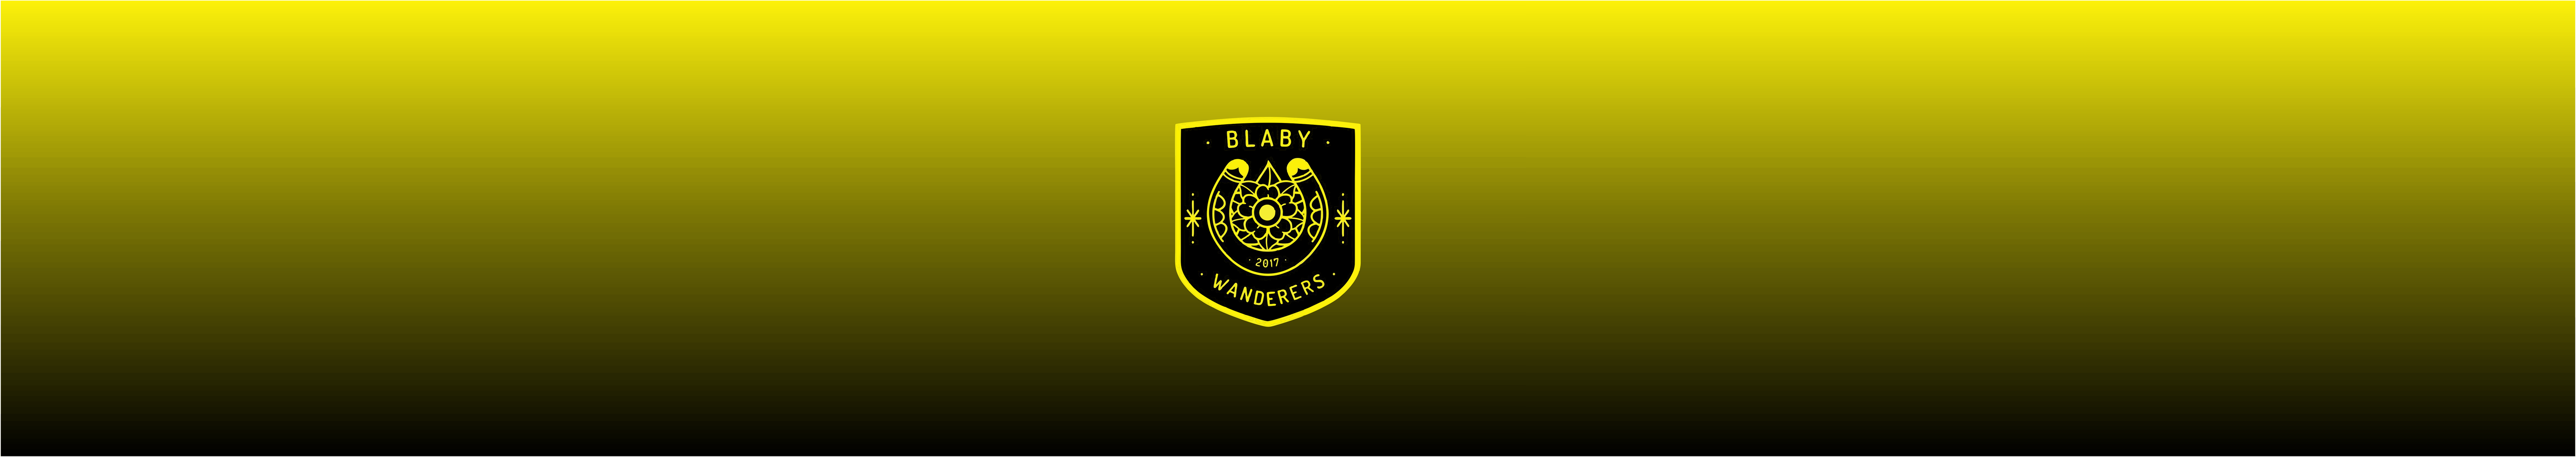 Blaby Wanderers